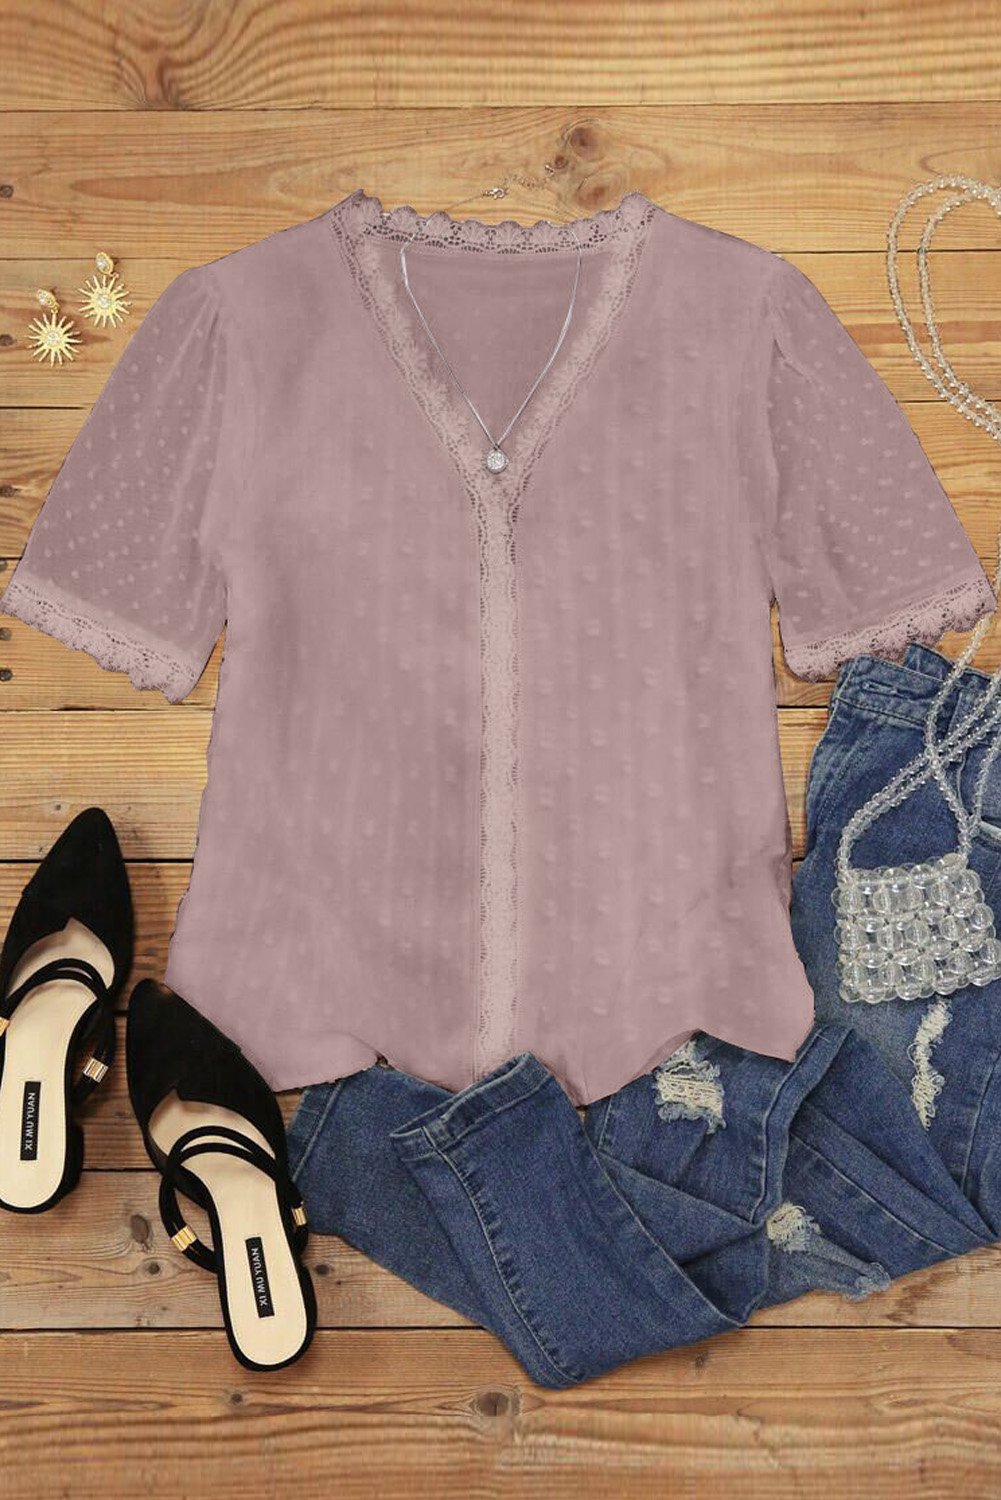 Lace Splicing V-Neck Swiss Dot Top Lace Splicing V-Neck Swiss Dot Top - M&R CORNERTop Trendsi